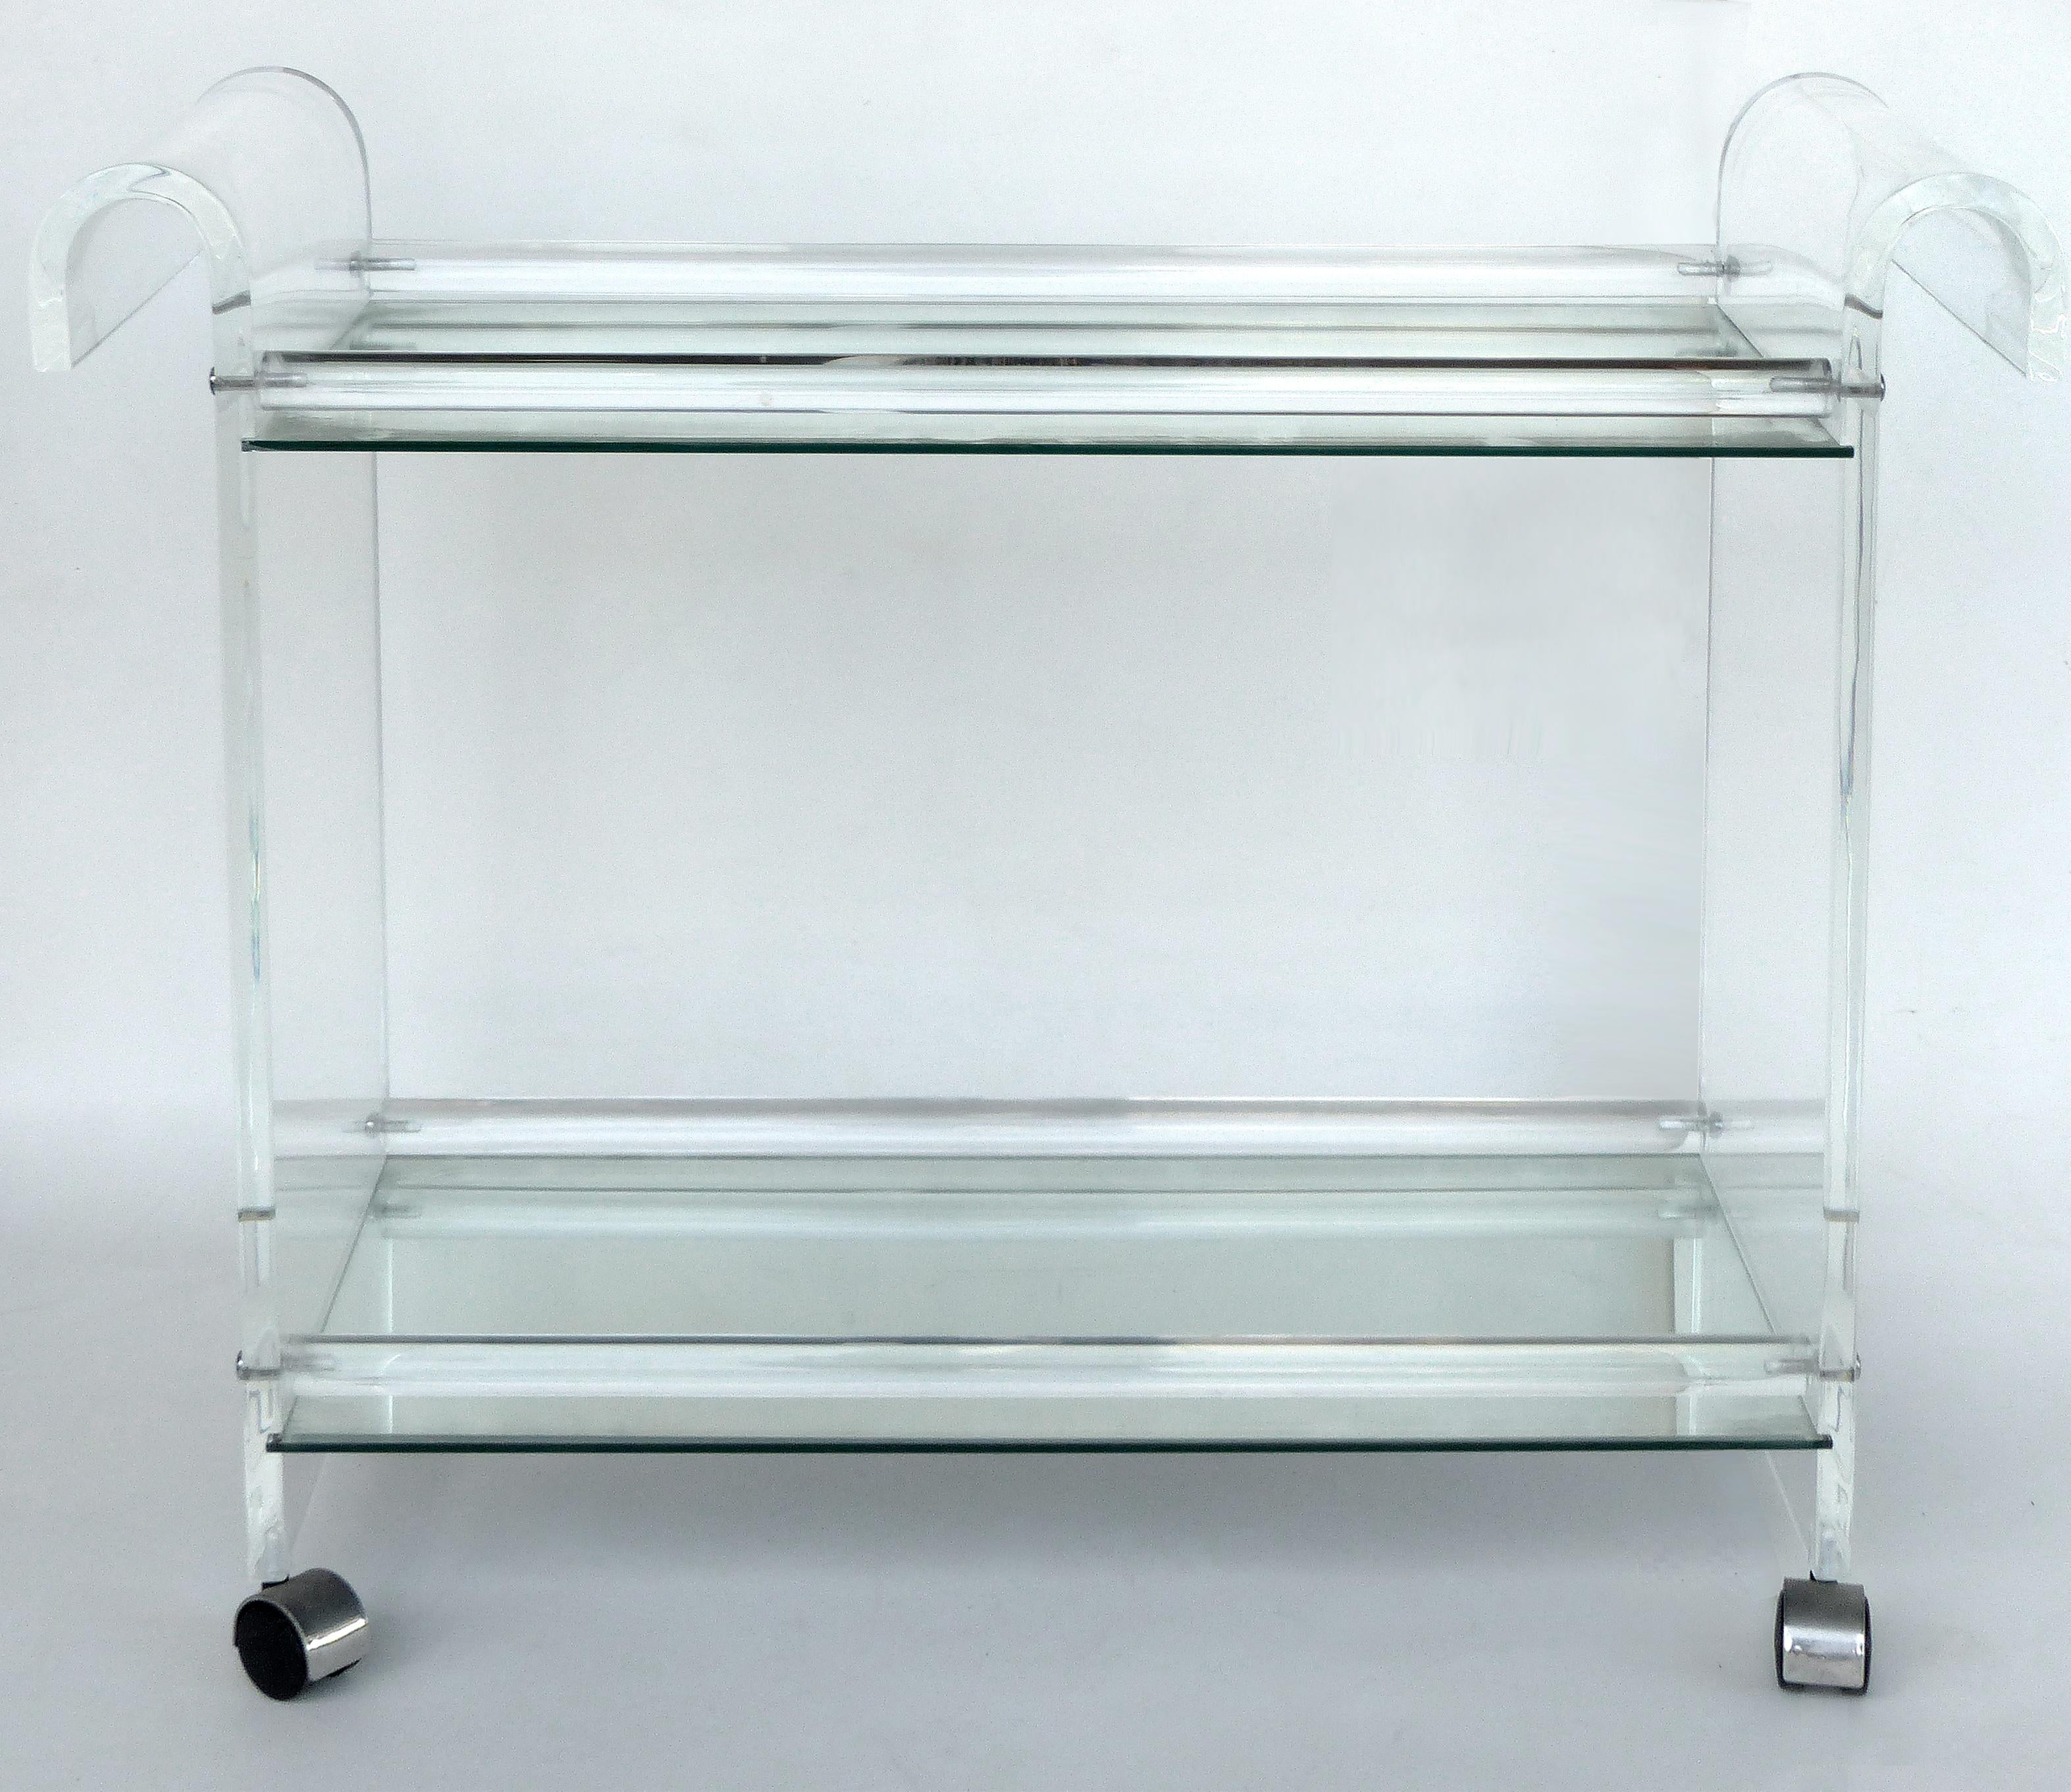 Mid-century Modern Lucite Tea or Bar Cart on Casters

Offered is a Lucite bar or tea cart with curved end handles and inset mirror shelves. The cart rolls nicely and directs from either end. The glass shelves have minor age wear but are easily